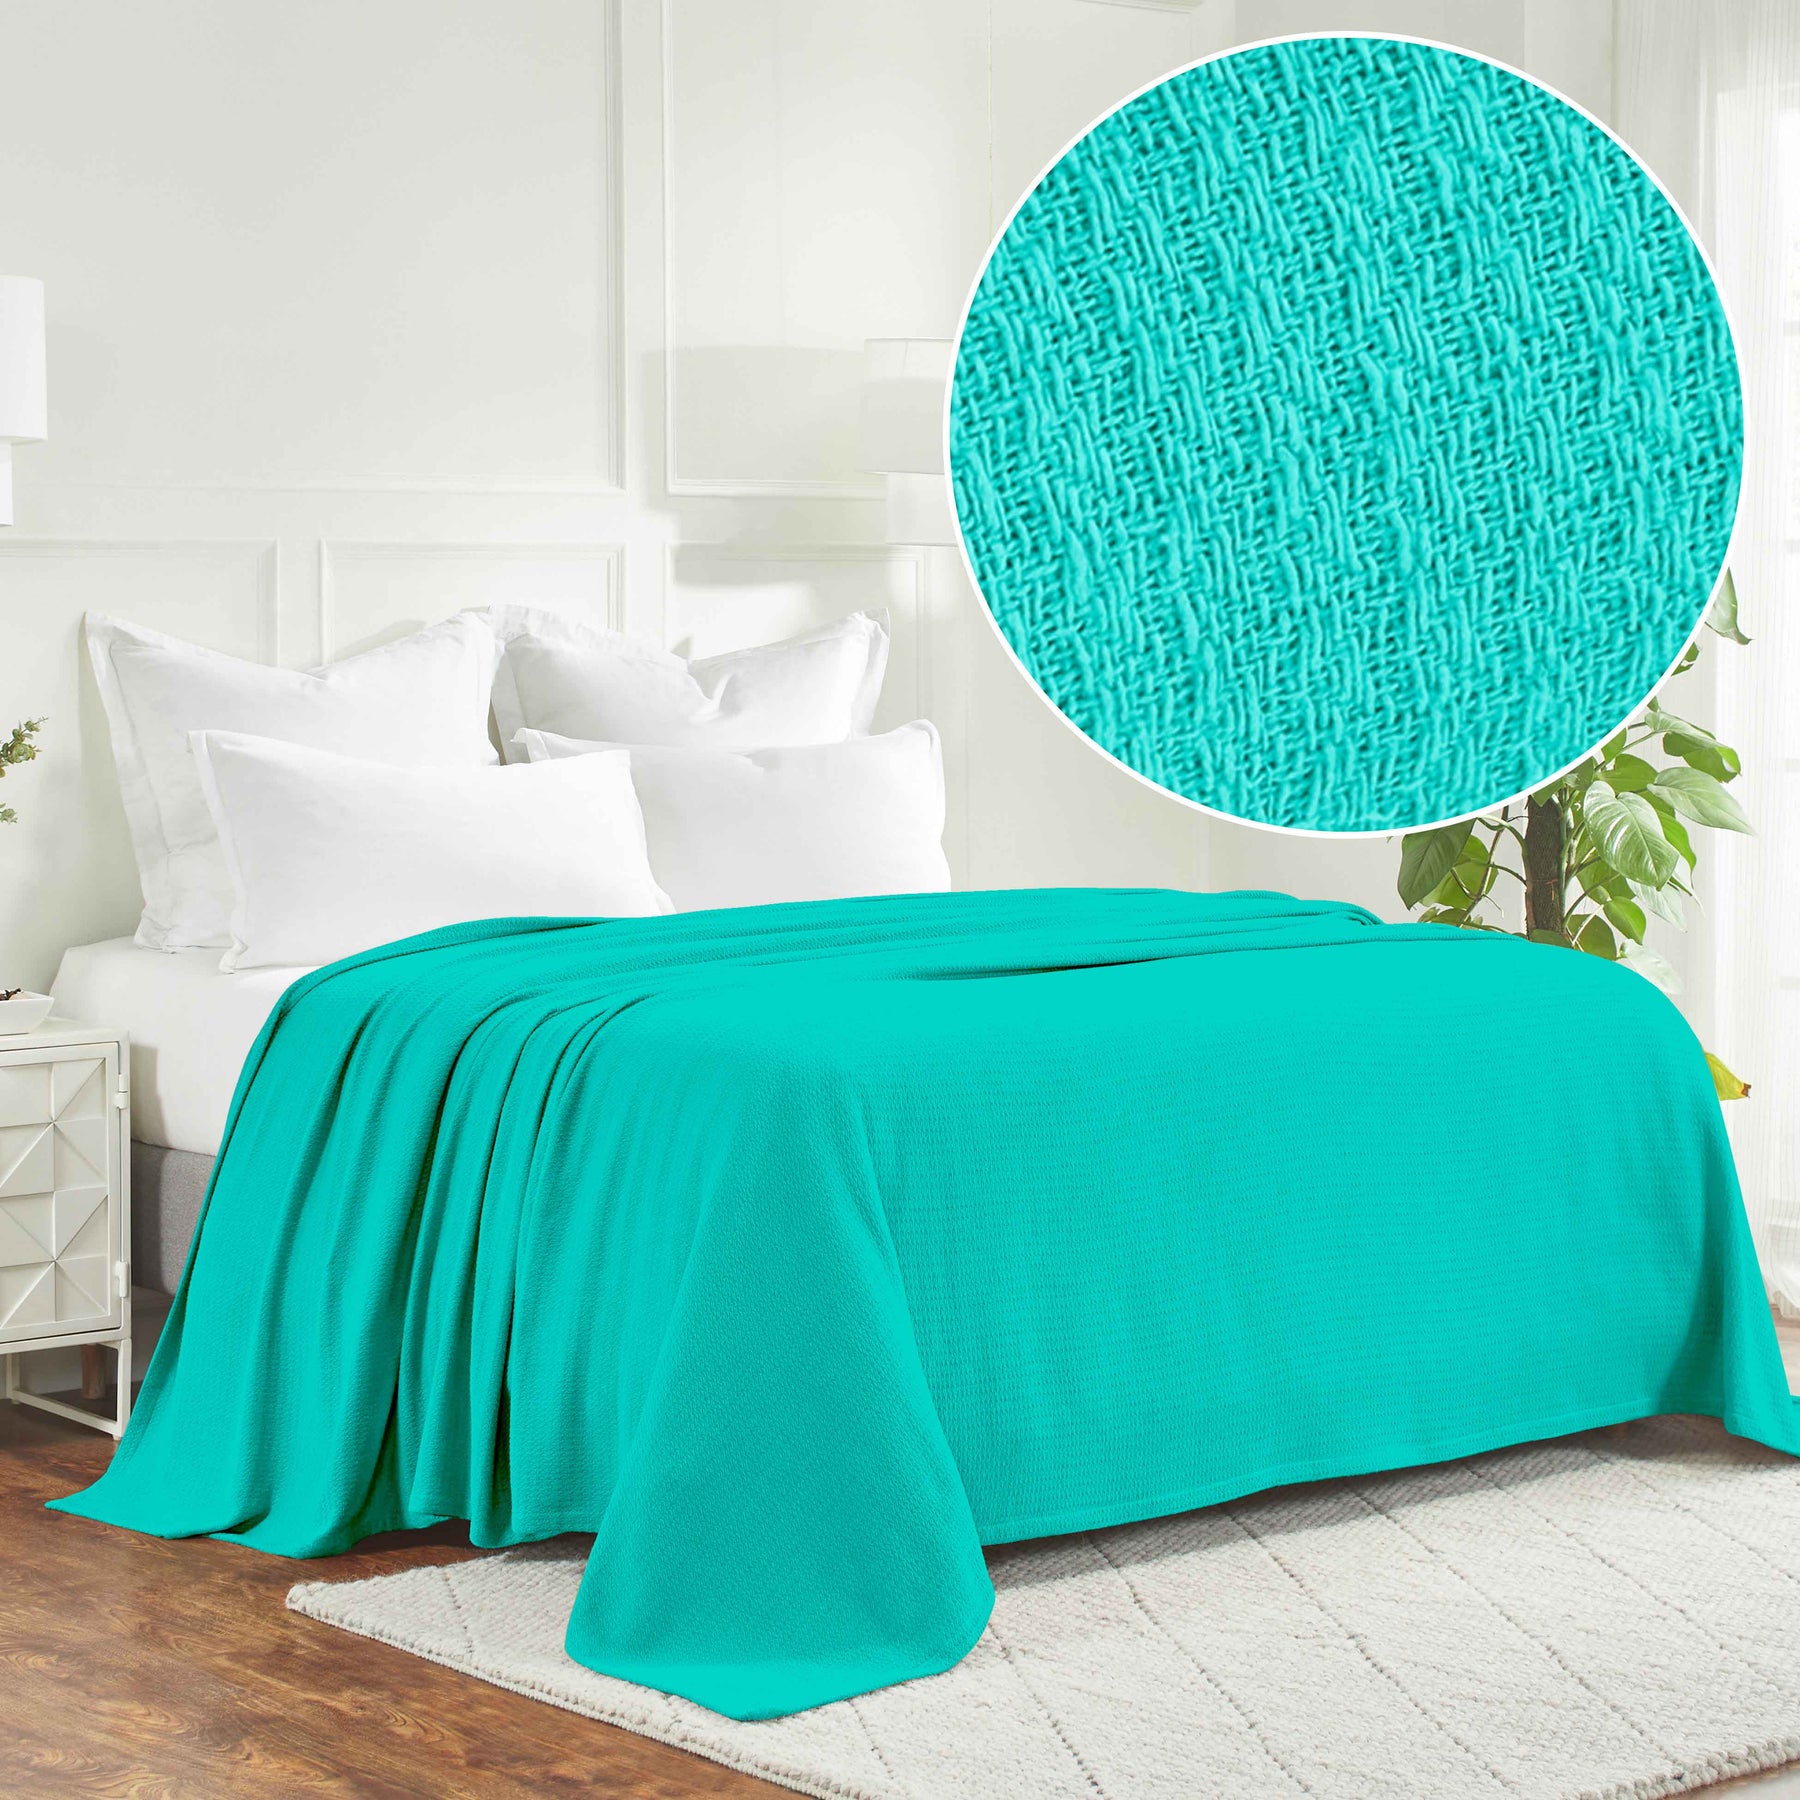 Waffle Weave Honeycomb Knit Soft Solid Textured Cotton Blanket - Turquoise